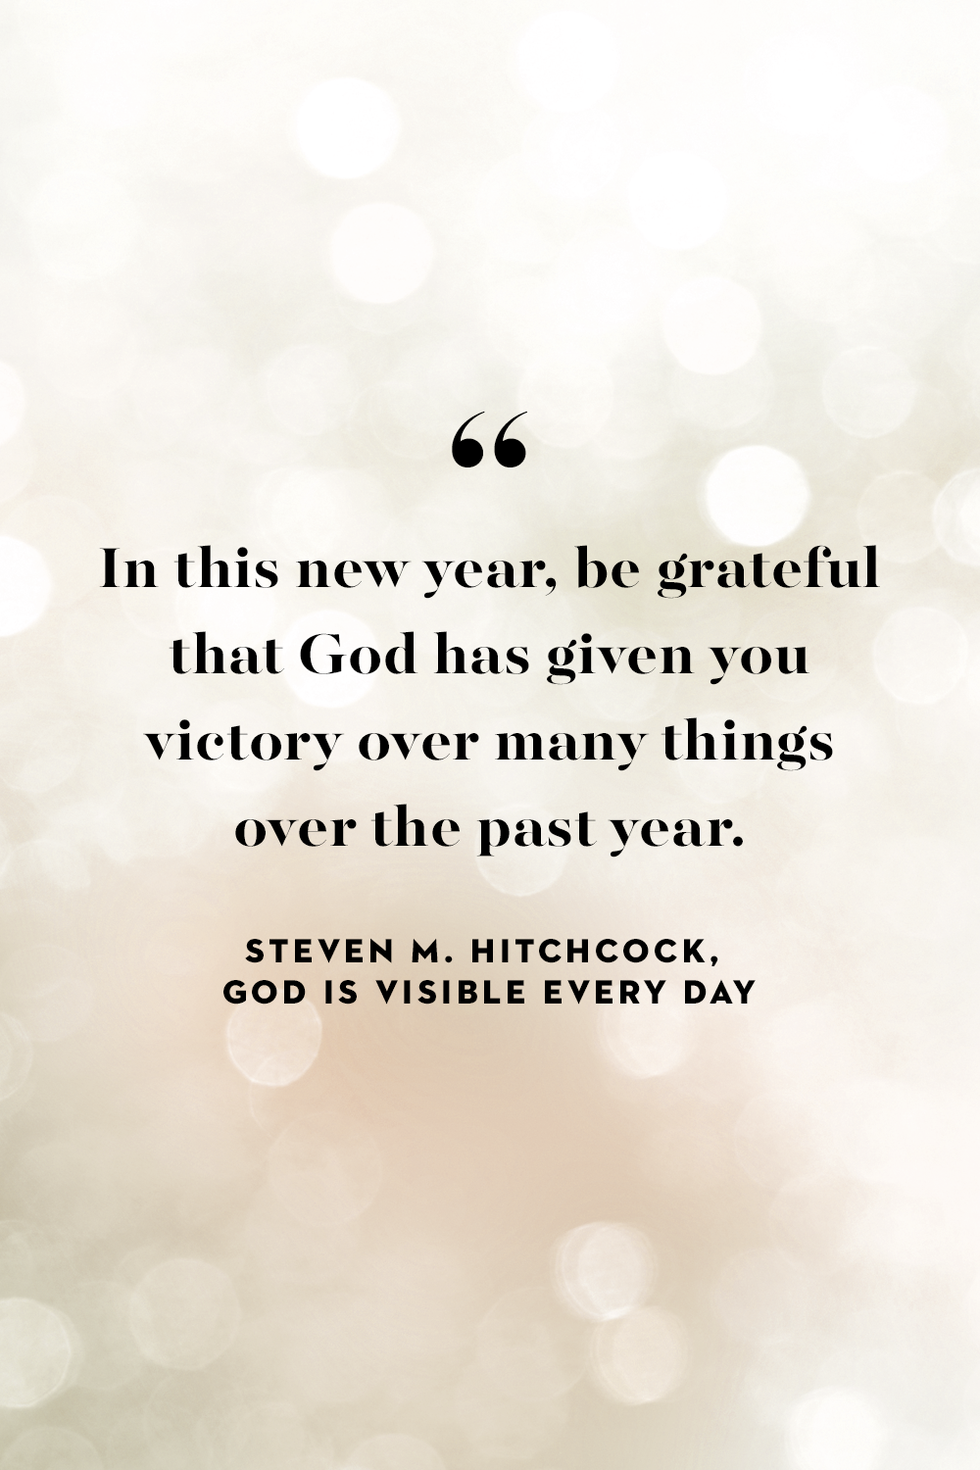 new year quote by steven m hitchcock, god is visible every day